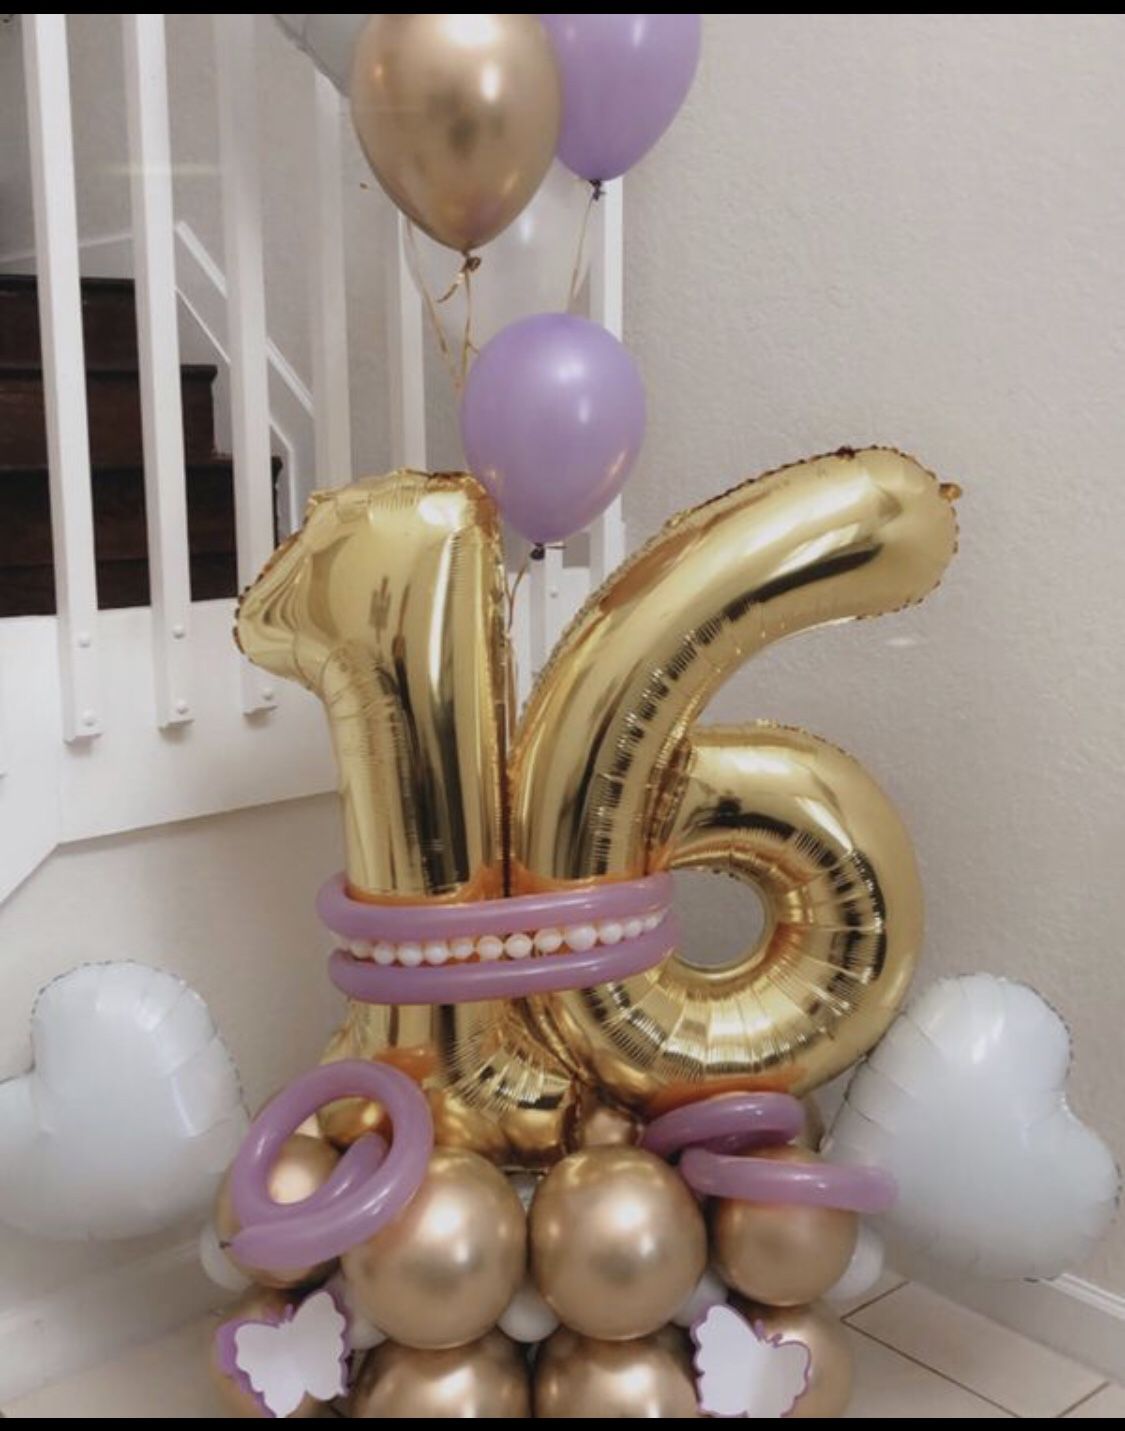 Balloon bouquets for any occasion. Birthday, Baby Showers, Wedding, Gender reveals and much more. Super affordable prices! Contact us for pricing. S